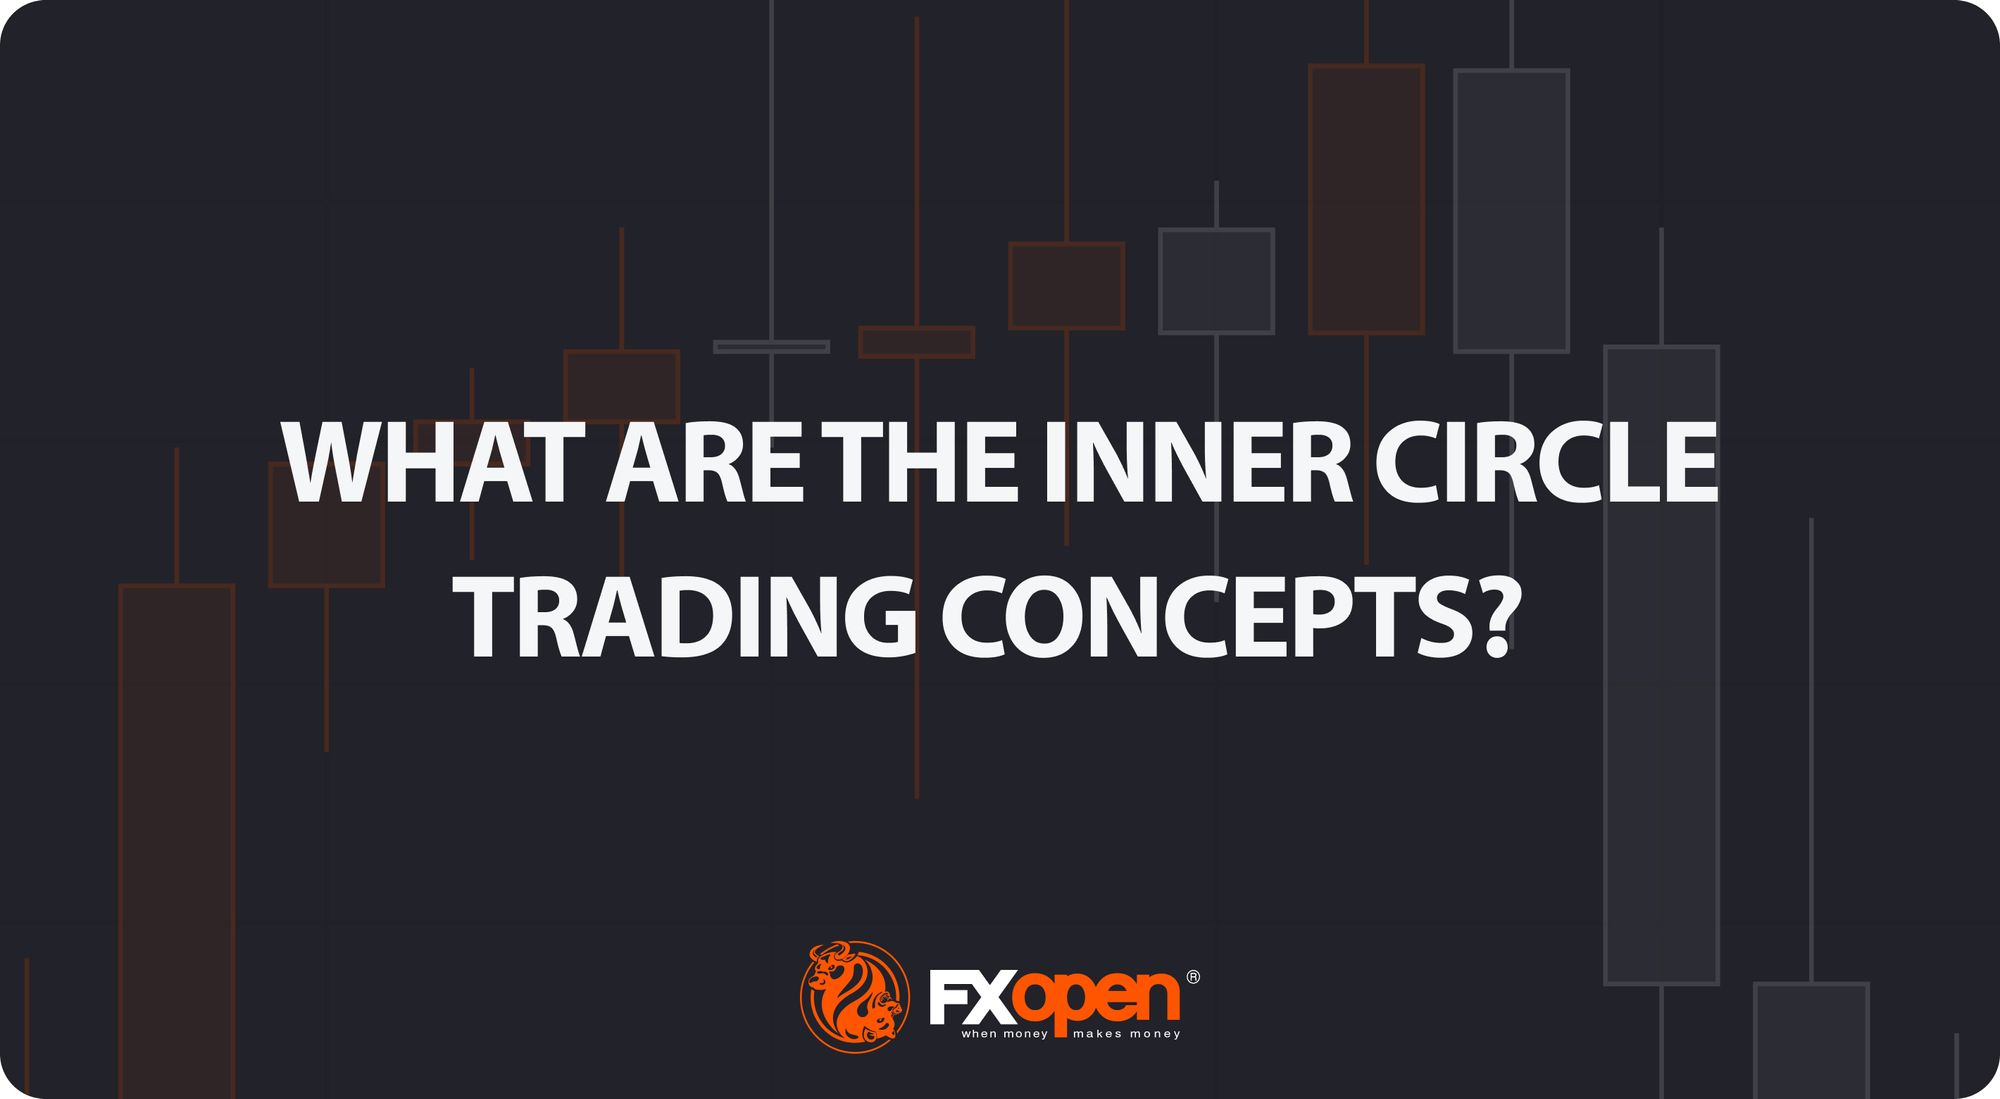 What Are the Inner Circle Trading Concepts?